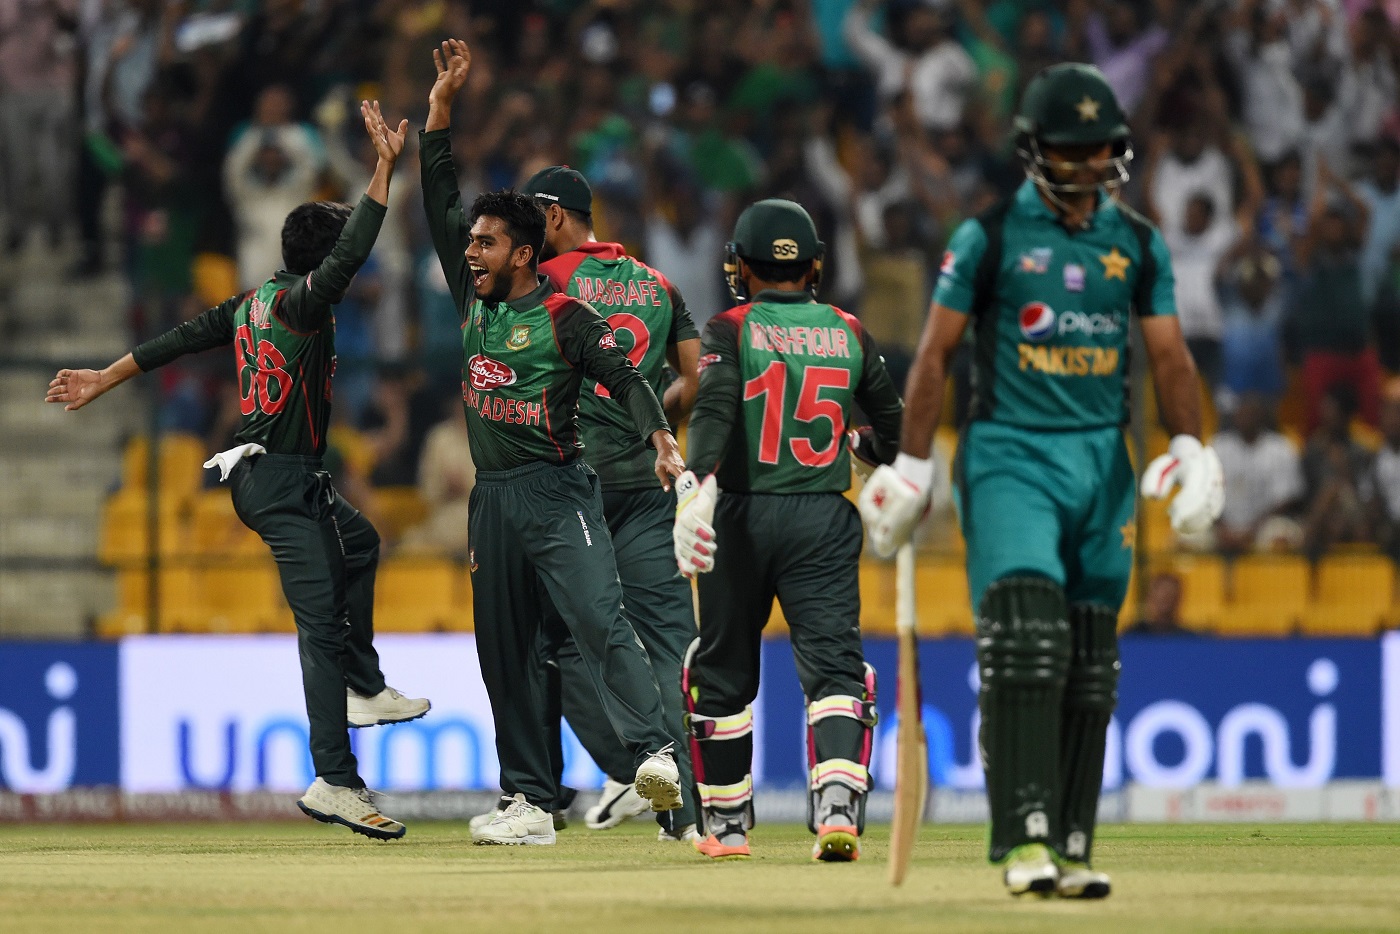 Pakistan’s T20 Series Defeat In South Africa